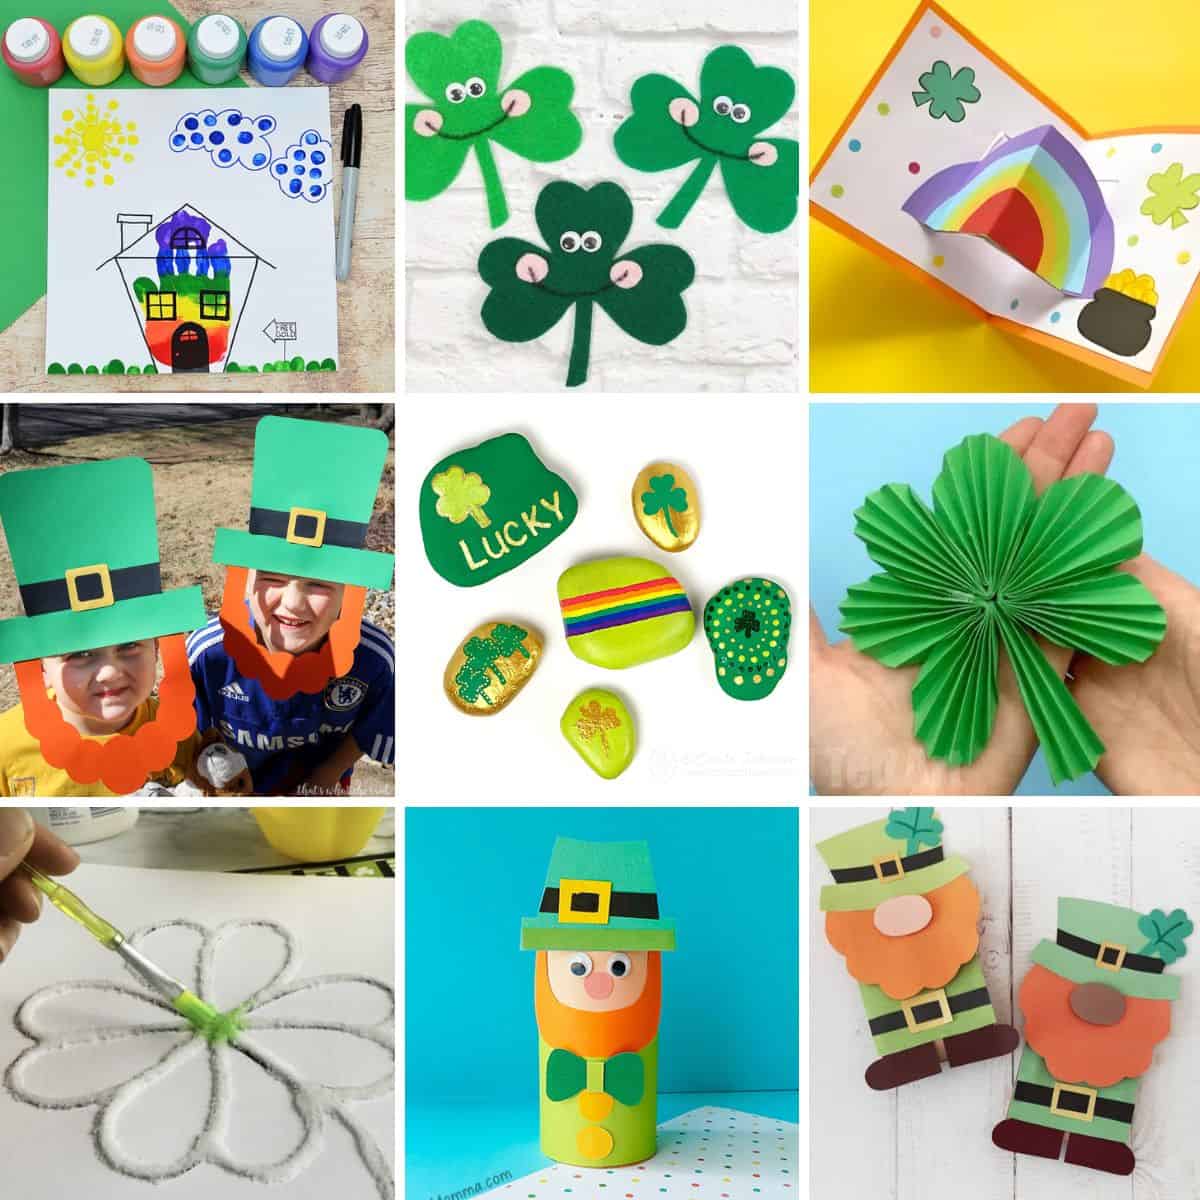 30 Fun St. Patrick's Day Crafts for Kids - The Crafty Blog Stalker